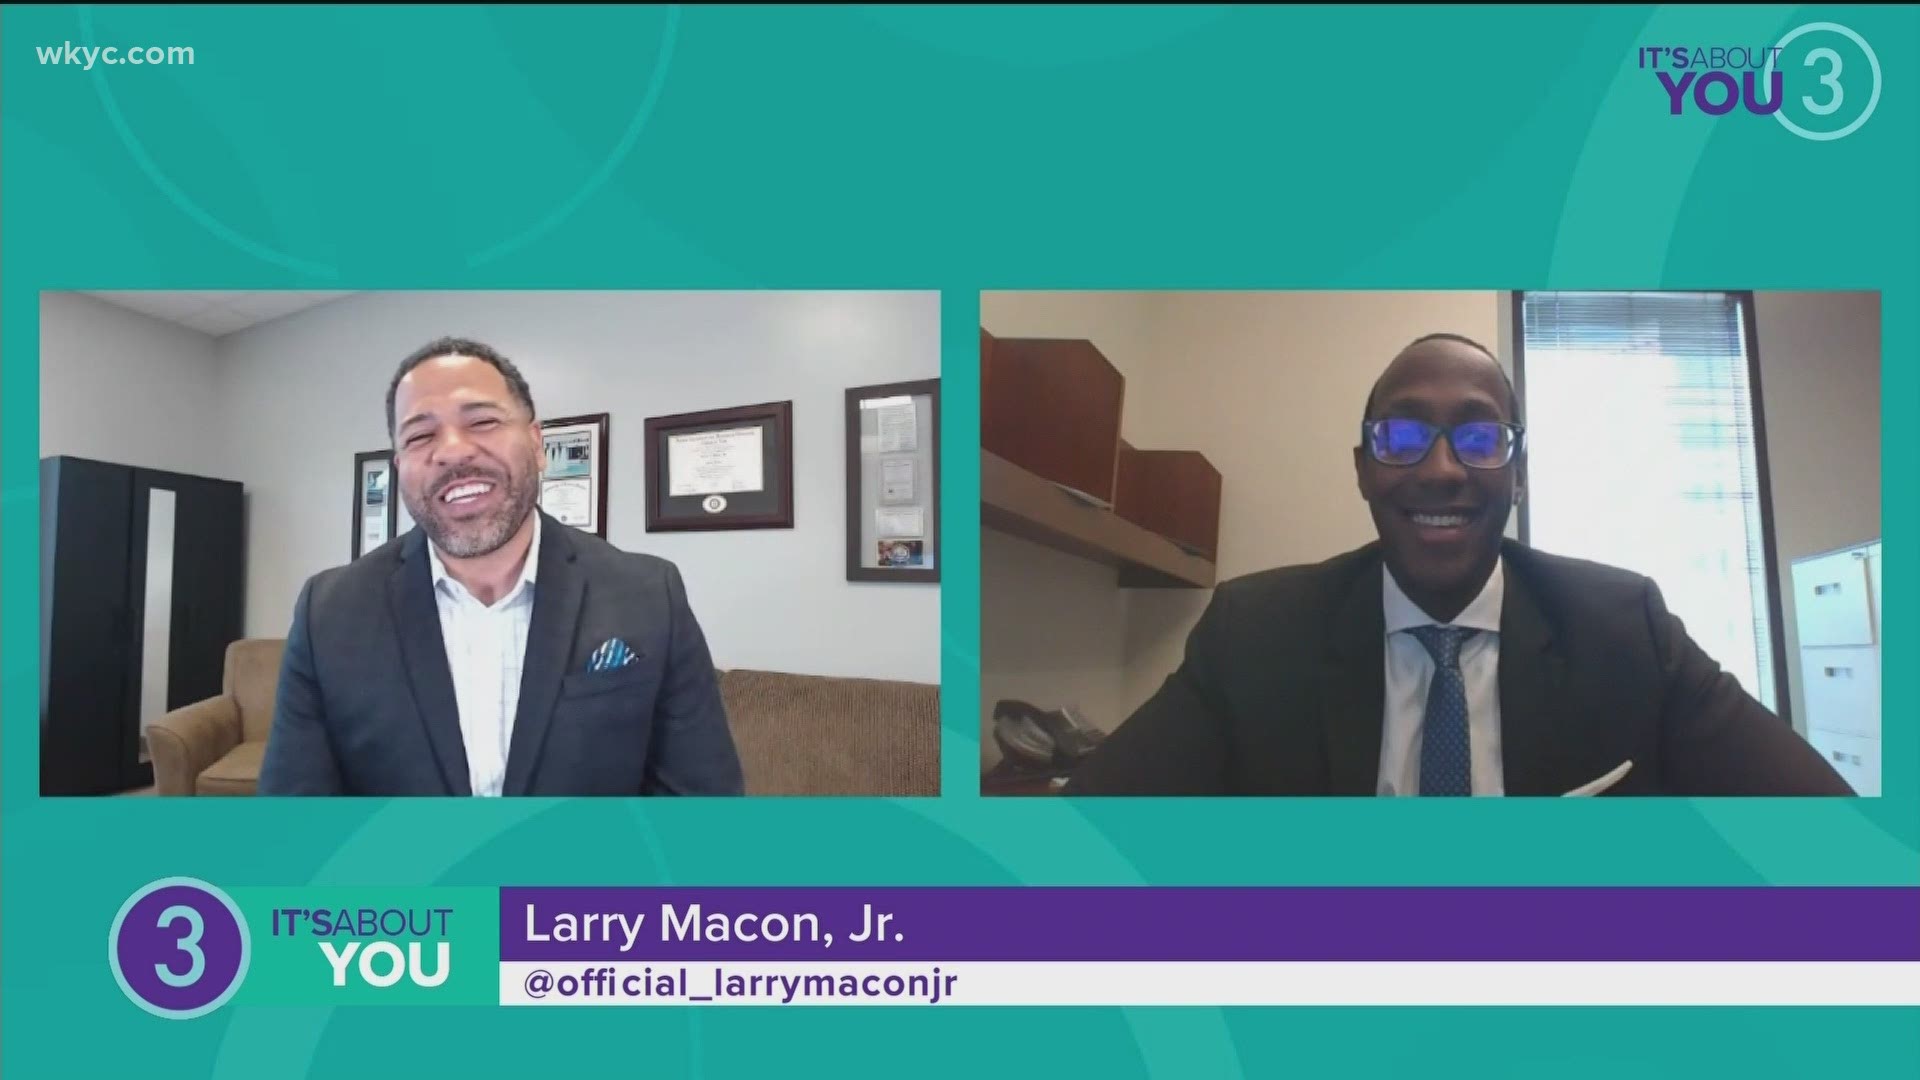 Larry is talking with this week's Everyday Champion Michael Bowen, Attorney at Calfee Halter & Griswold LLP, about his work supporting black entrepreneurs.